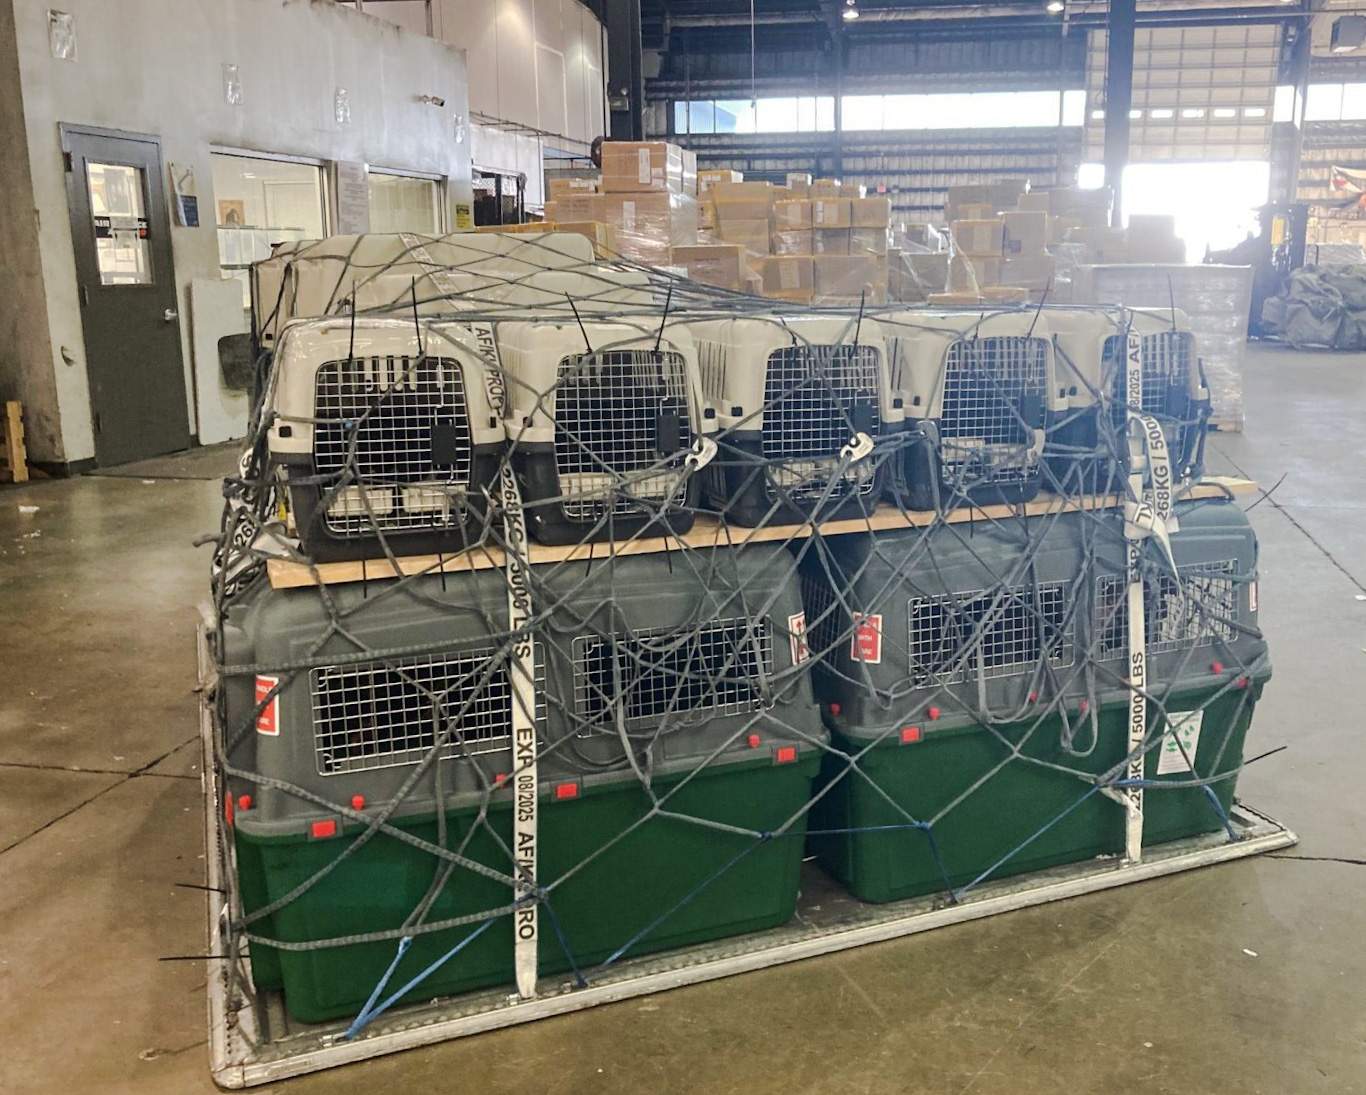 Cats rescued from war torn Ukraine and airfreighted to DC